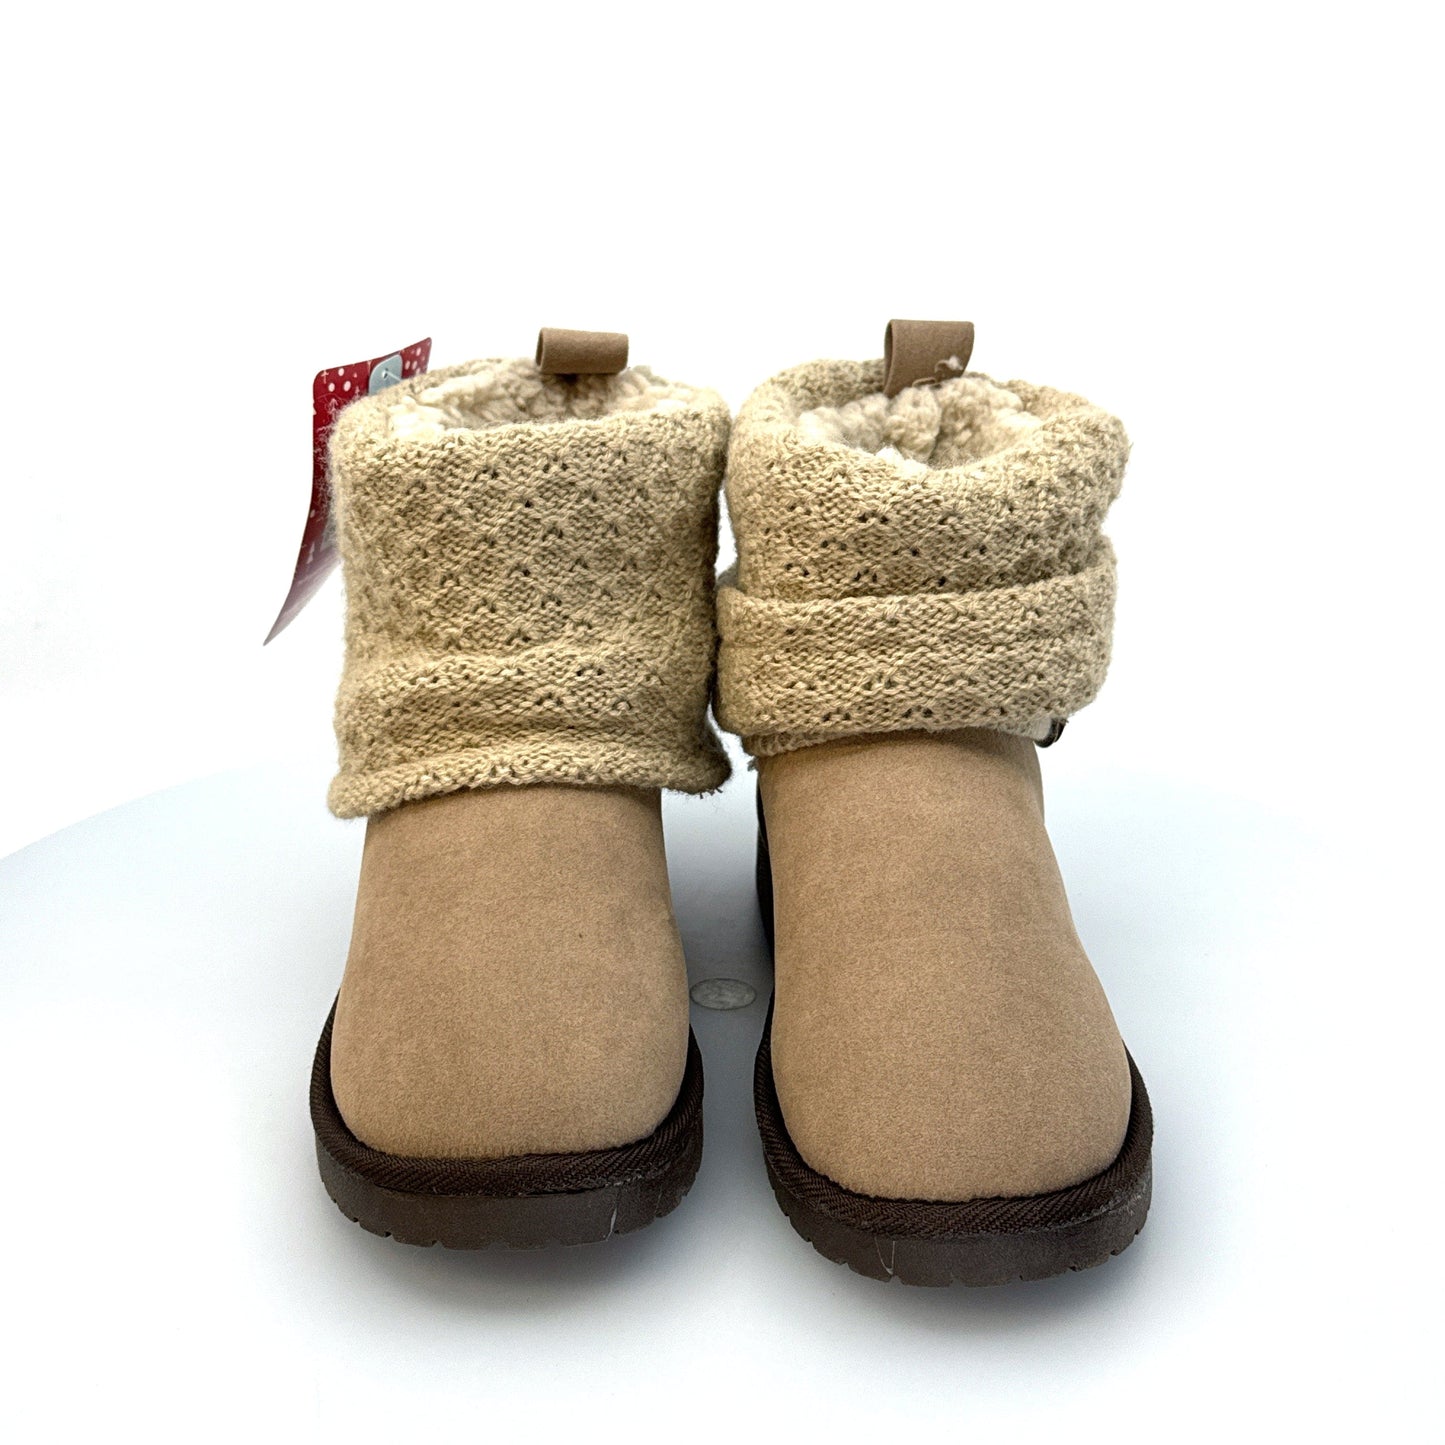 Muk Luks Essentials | Womens Laurel Boot | Color: Beige/Fawn Marl | Size: 6 | NWT